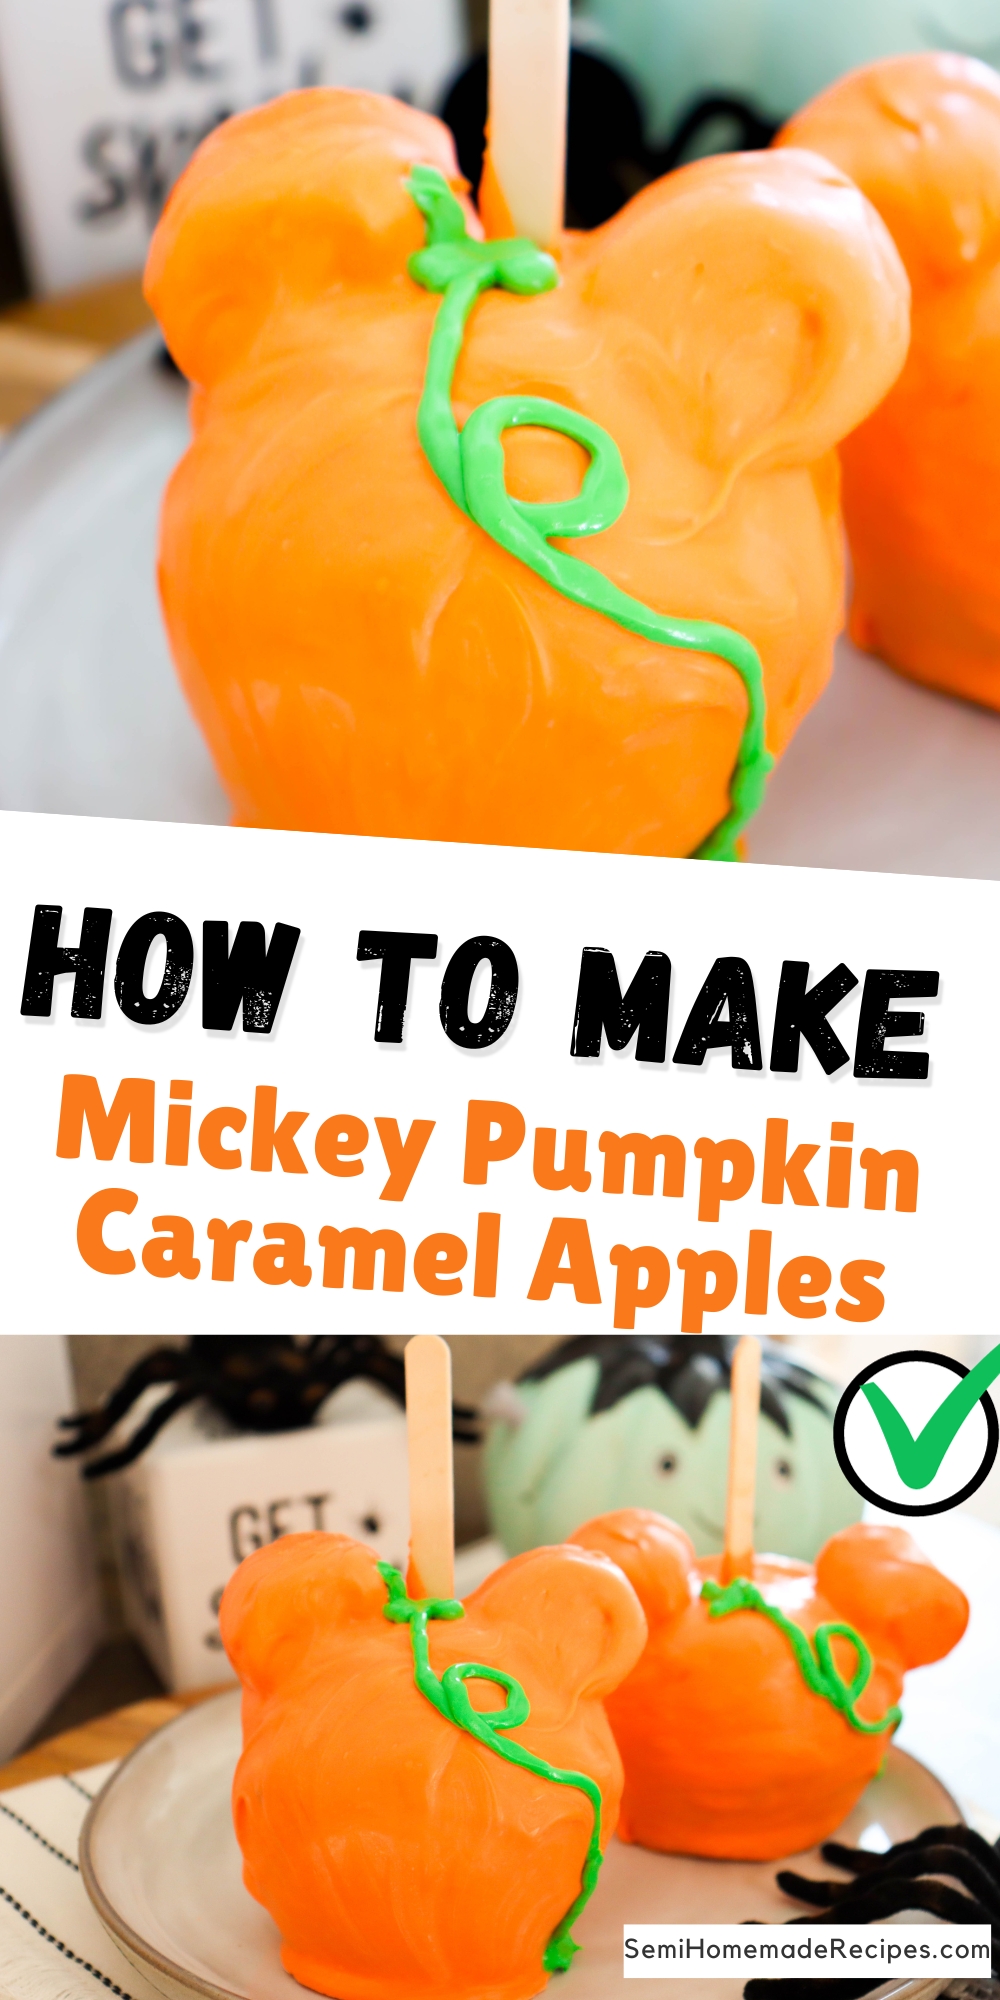 Copycat Disney Mickey Pumpkin Caramel Apples are super cute and perfect for anyone that loves Disney and Halloween!